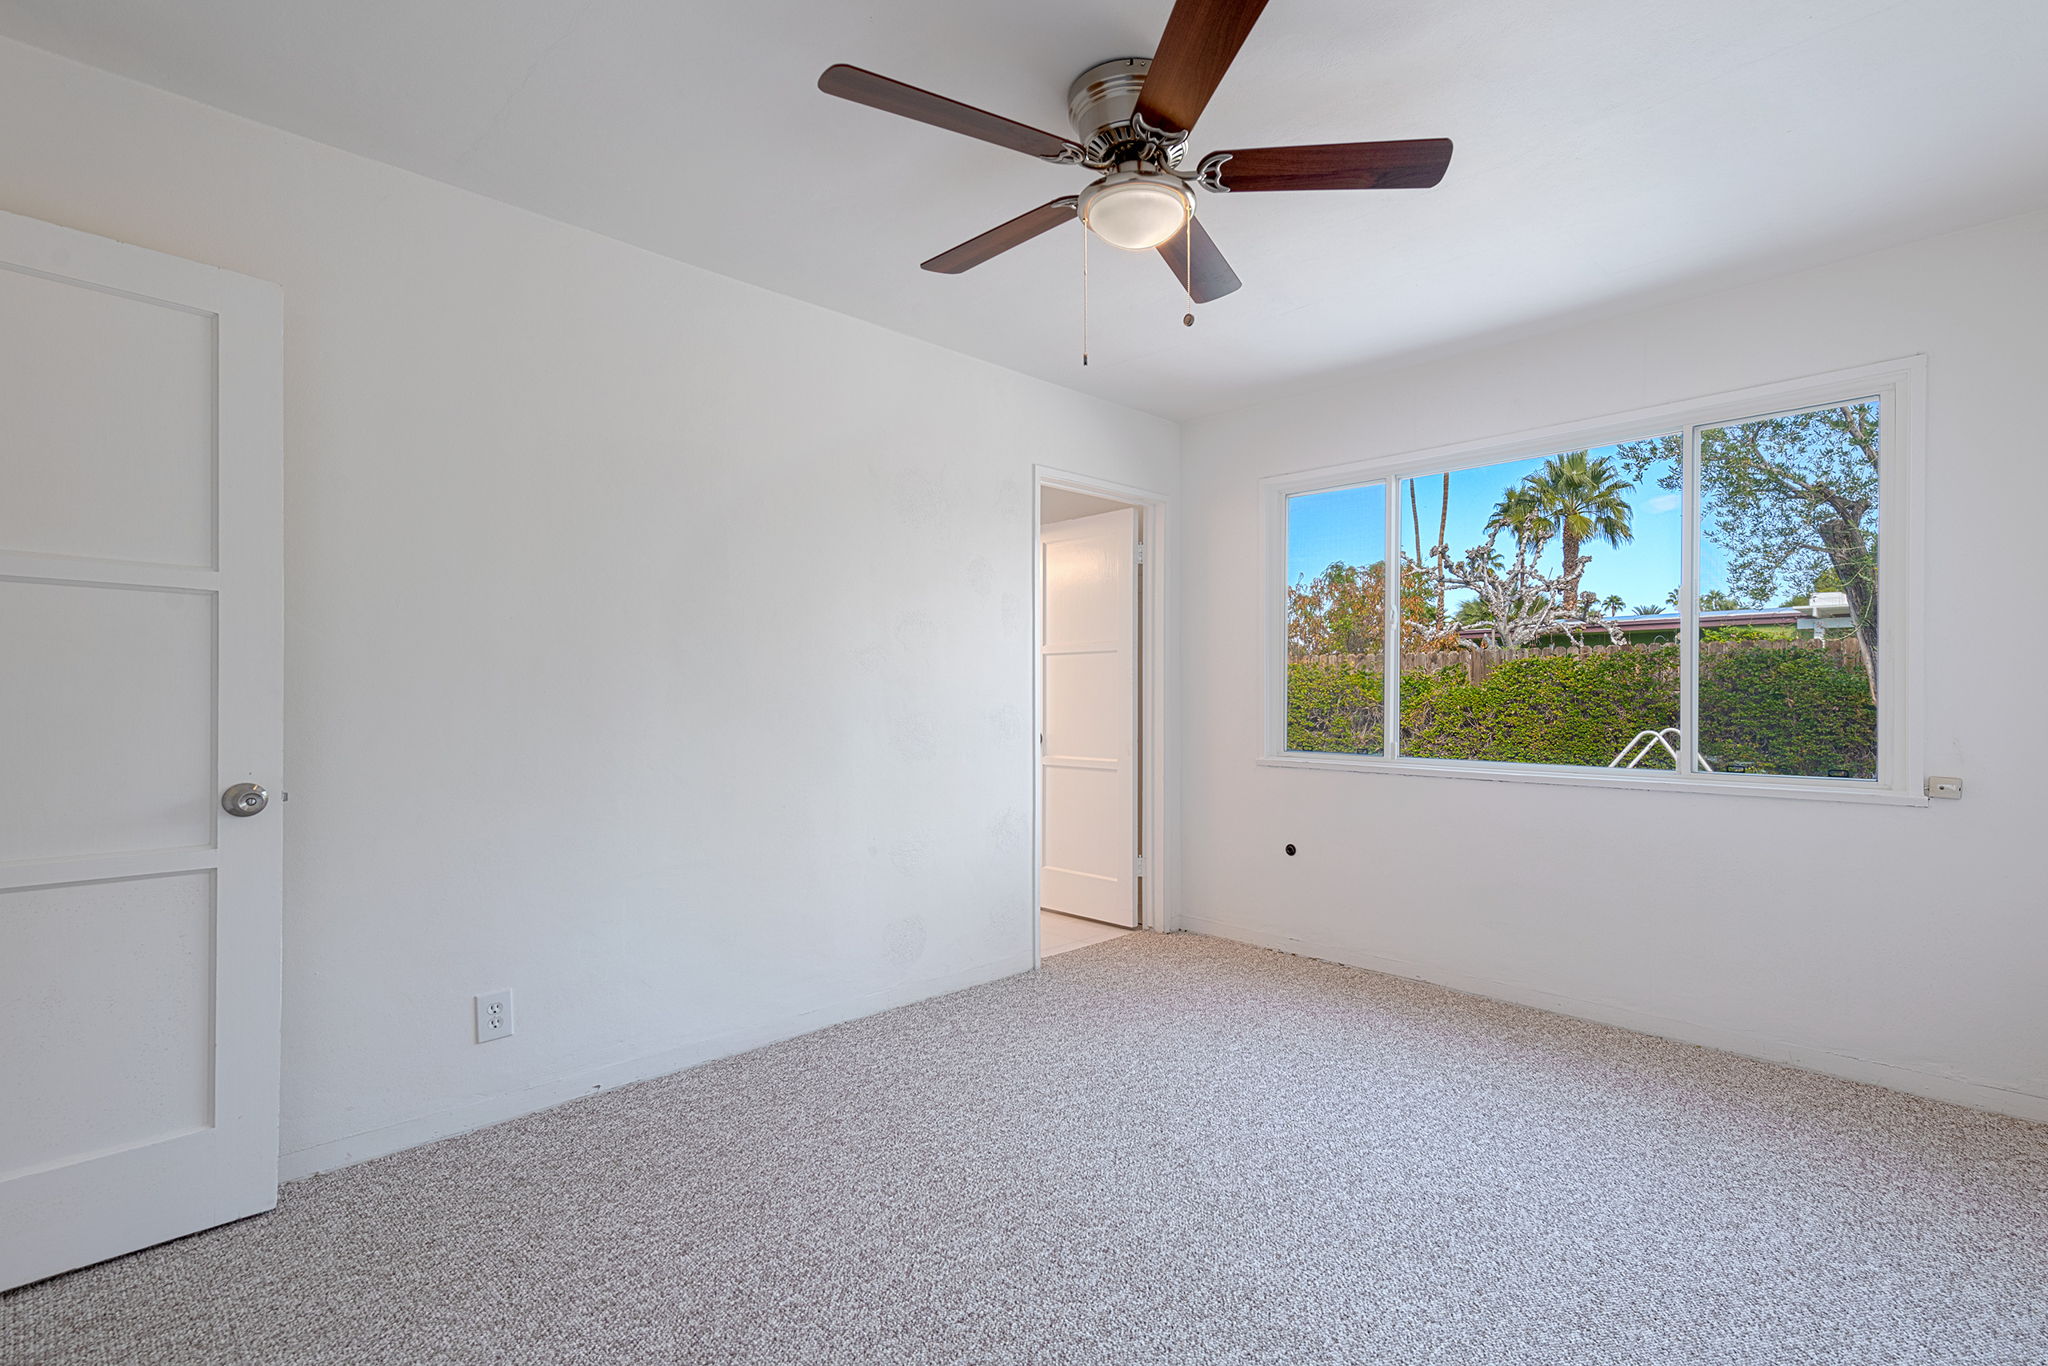  1134 N Calle Rolph, Palm Springs, CA 92262, US Photo 14